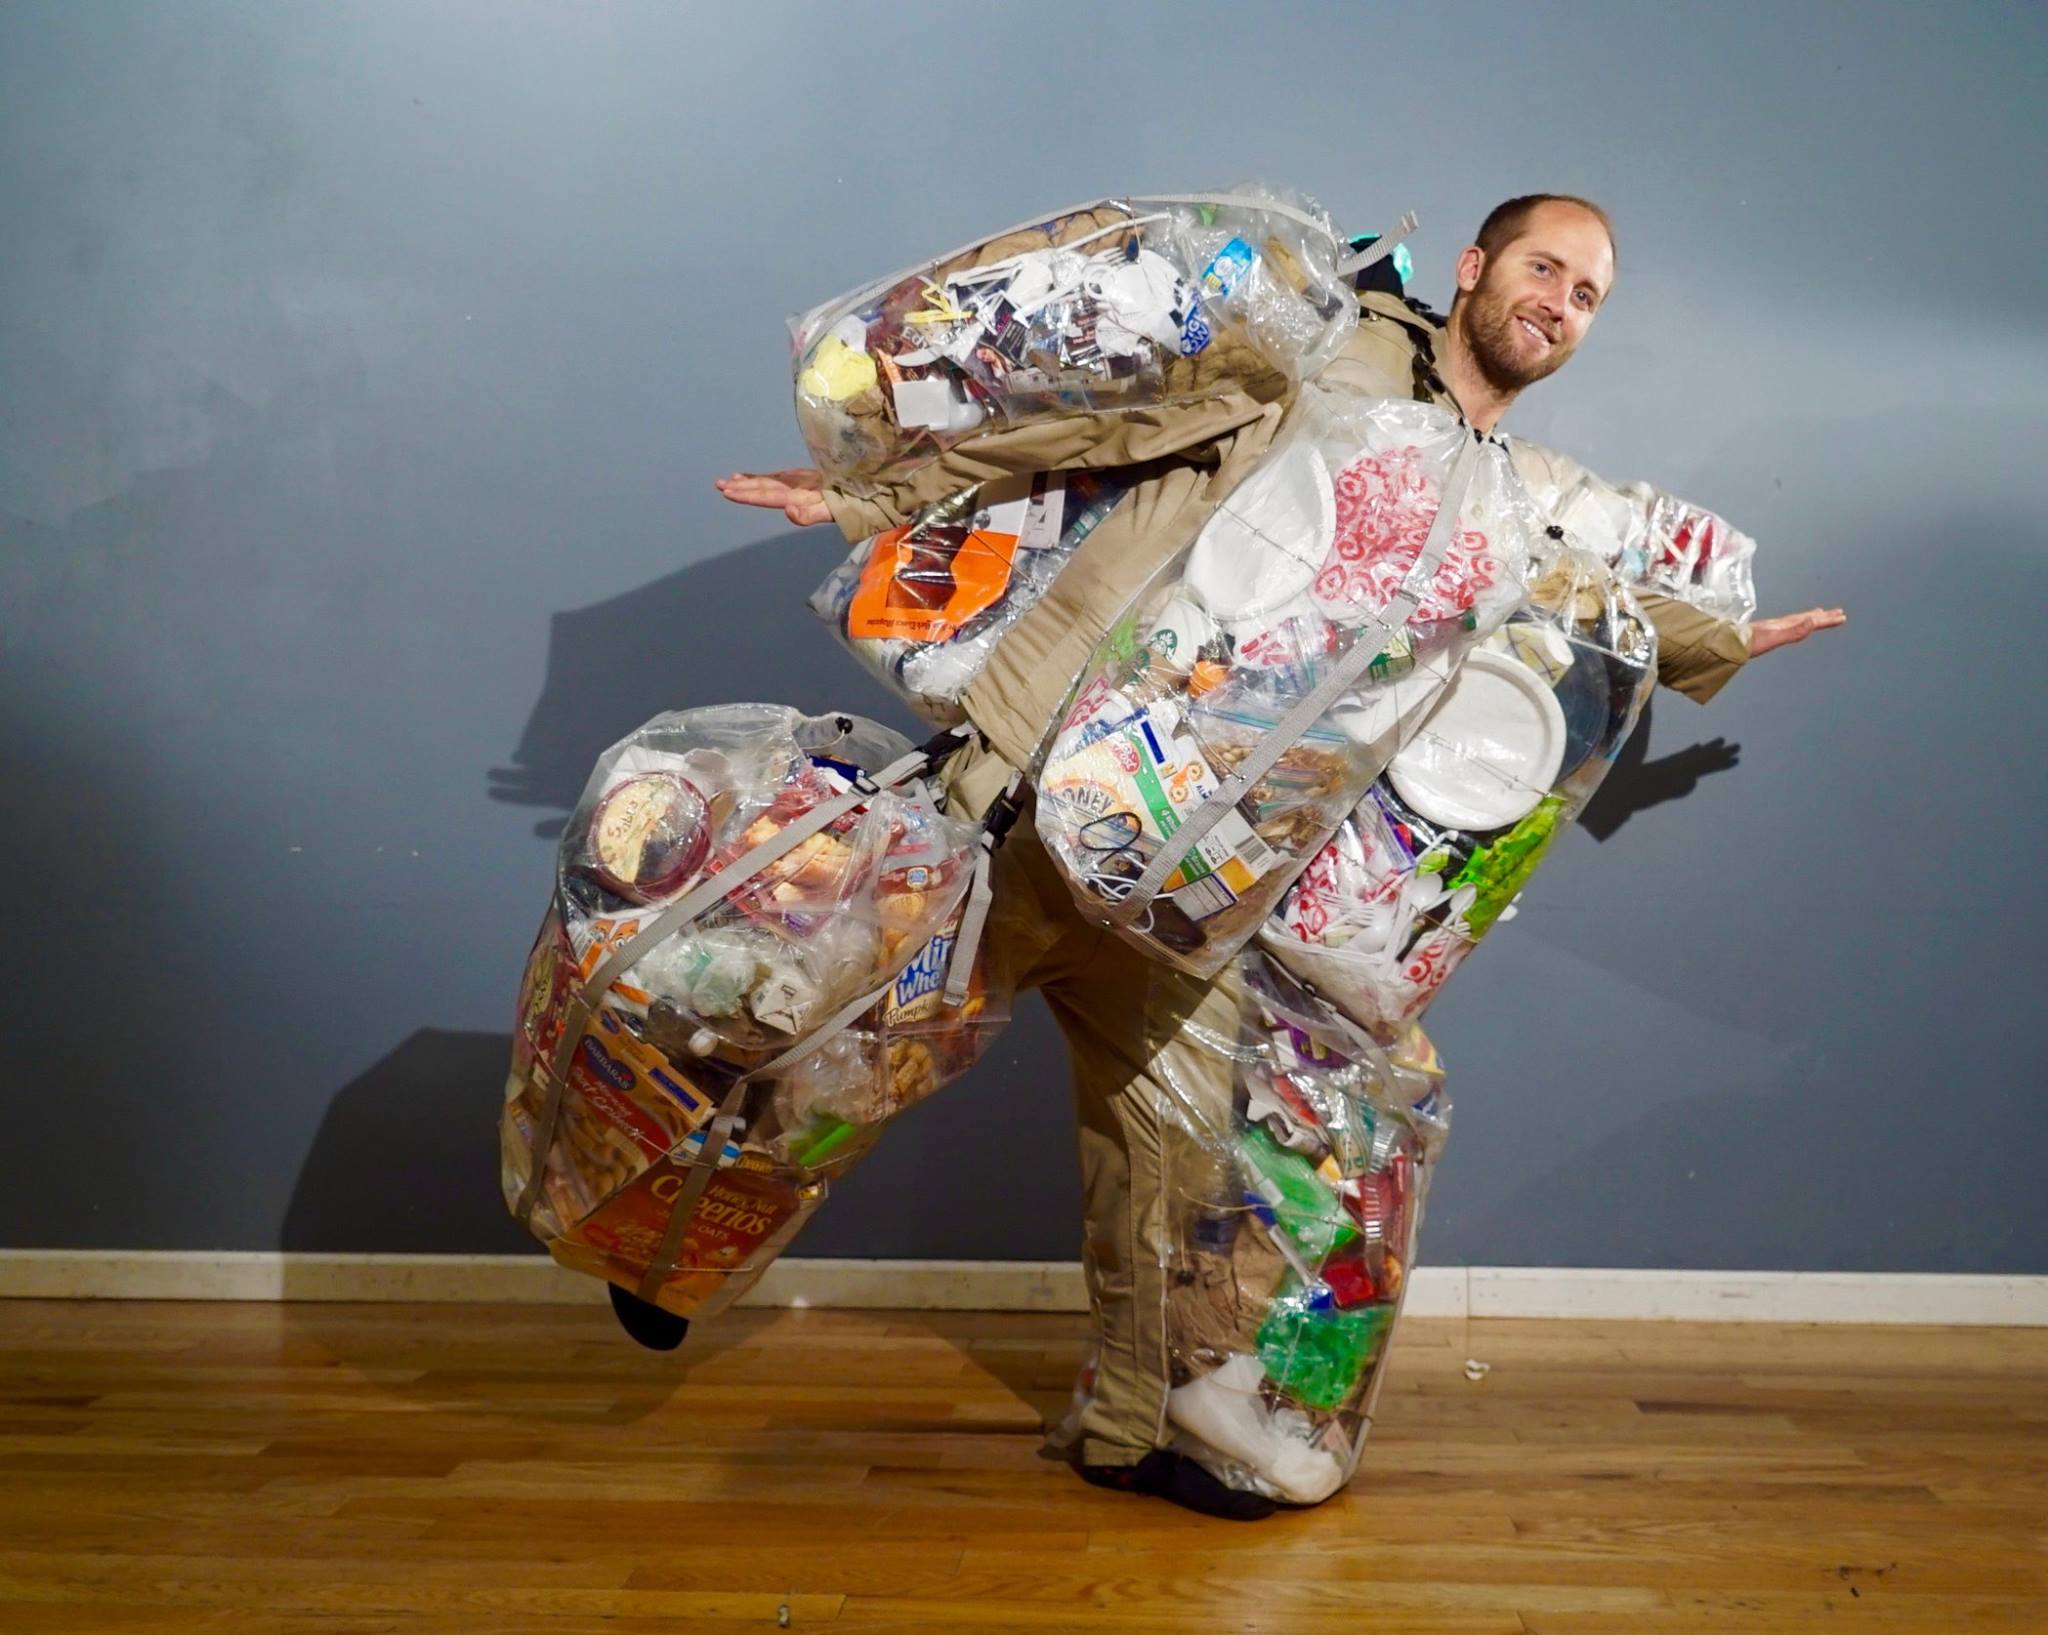 This is how much trash Greenfield accumulated in 30 days of living like the average American. “The average American creates 135 pounds per month and I only created 84 pounds, about 1/3 less than the average. What would you look like if you wore a month’s worth of your own trash? Would it be a scary sight?” — Rob Greenfield